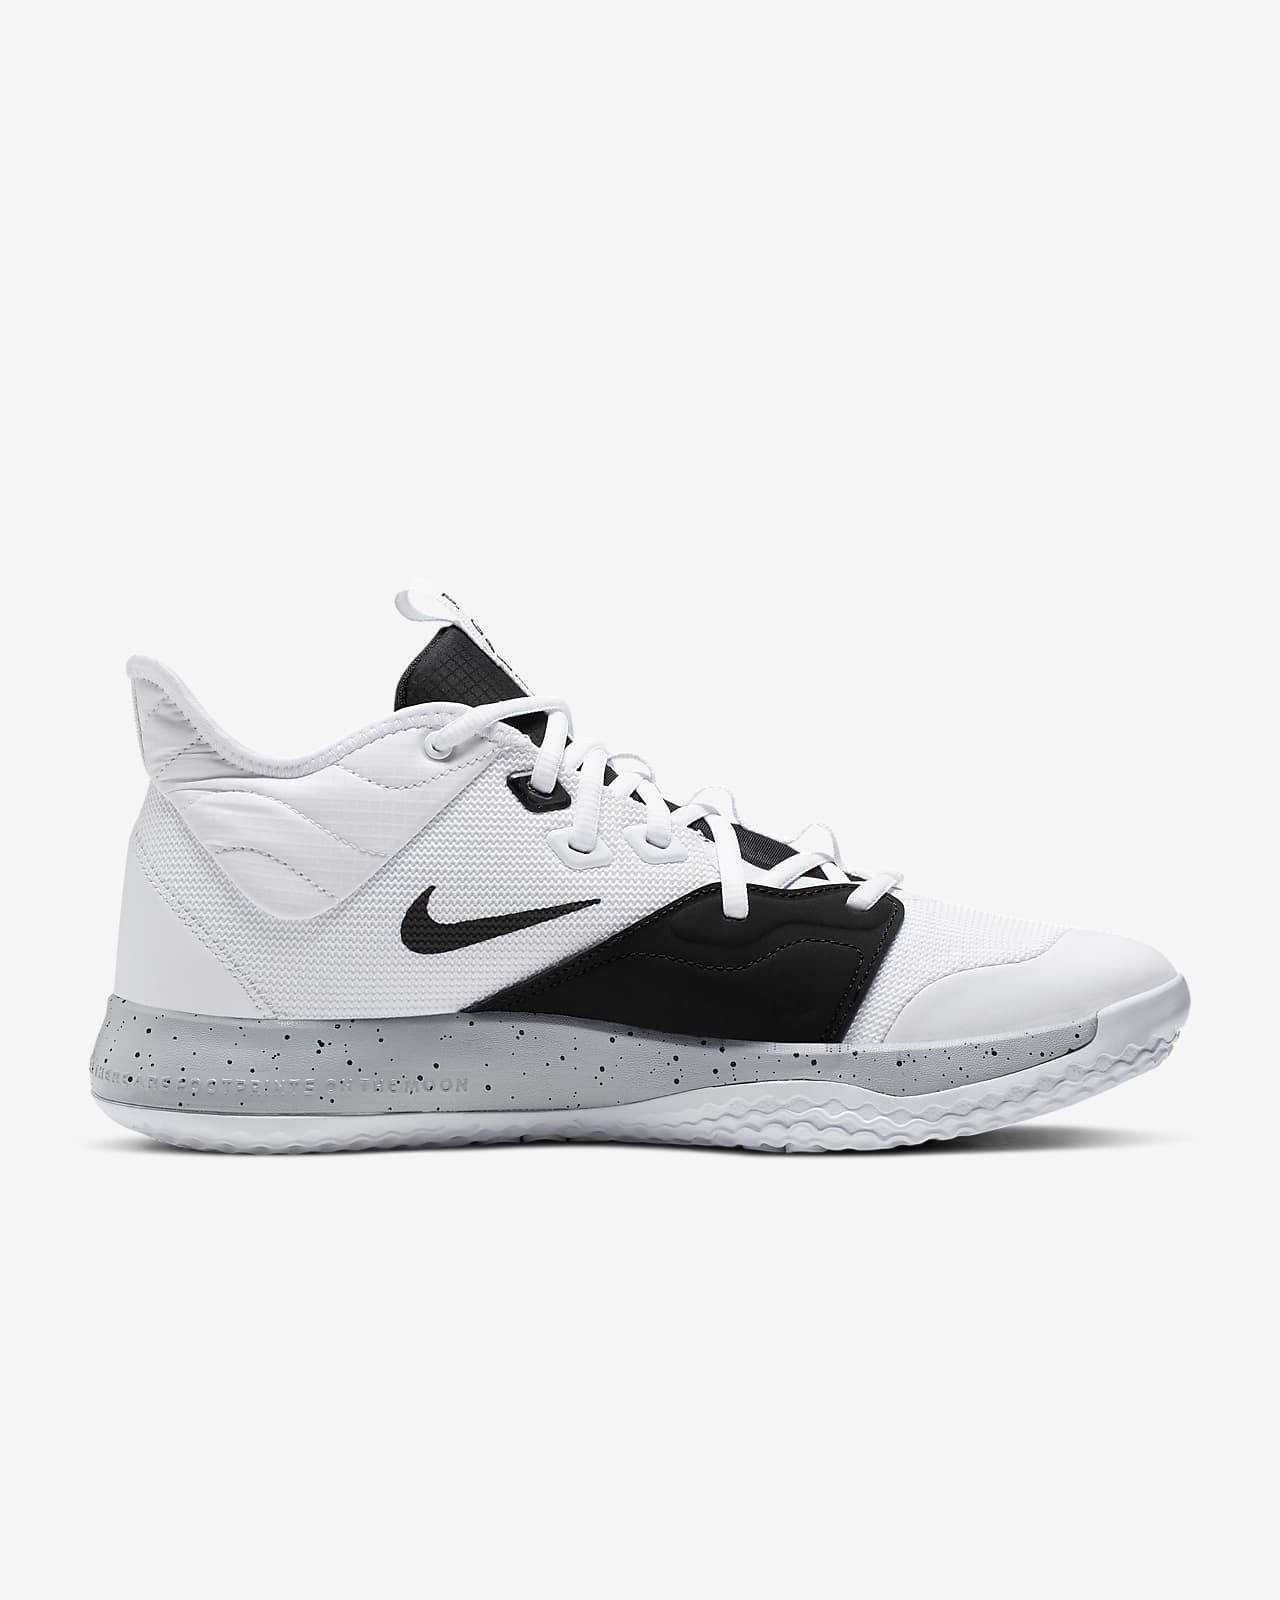 Paul George 3 Shoes Price Philippines : Paul George Nike Ph / The top ...